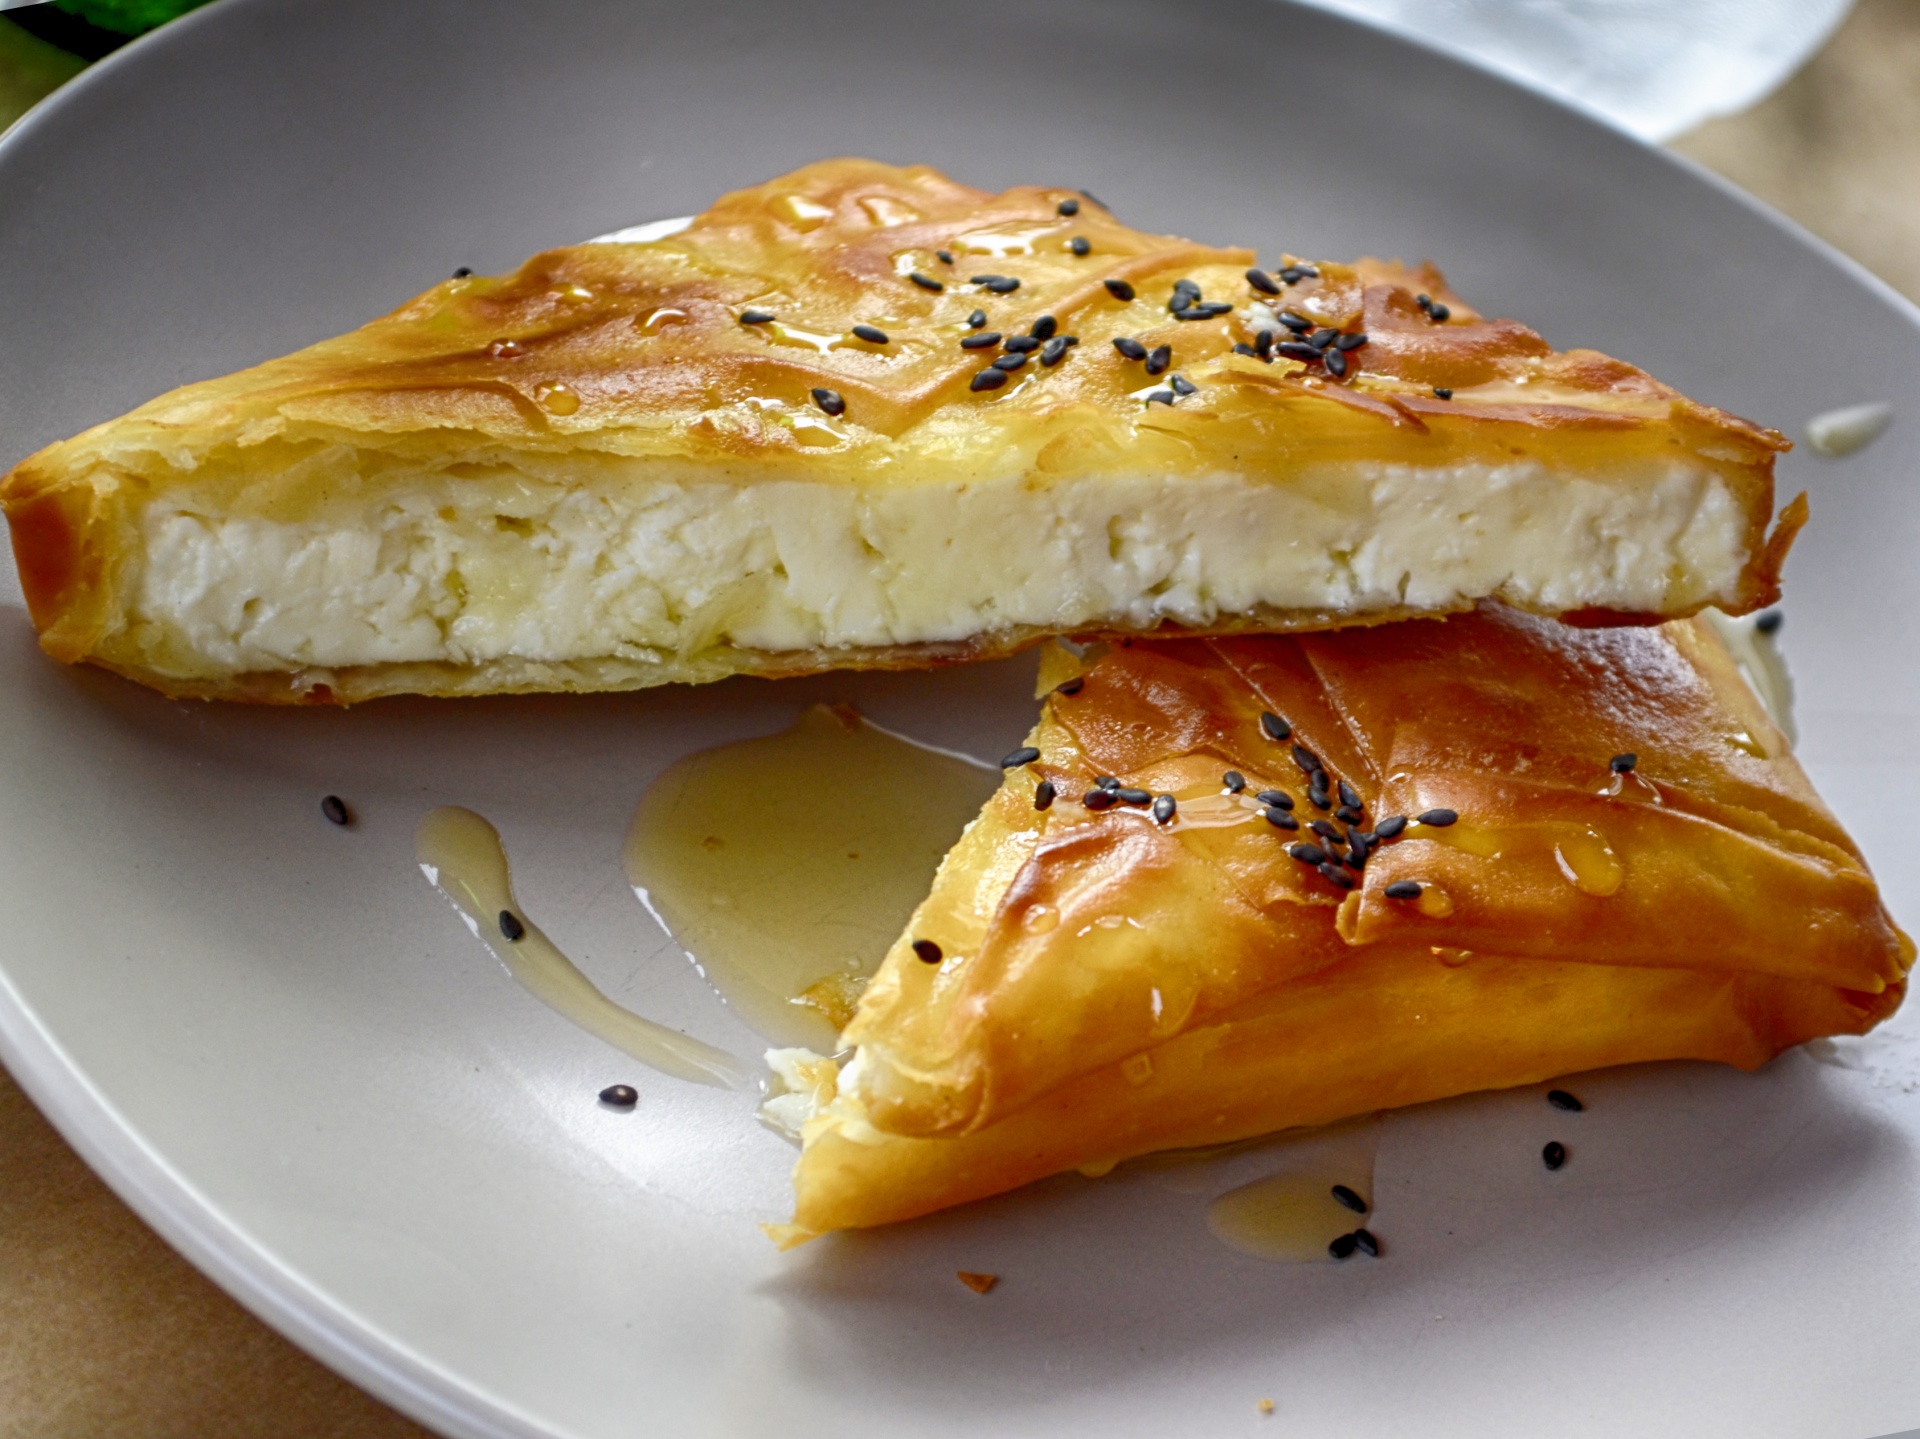 Goat Cheese Wrapped in Phyllo